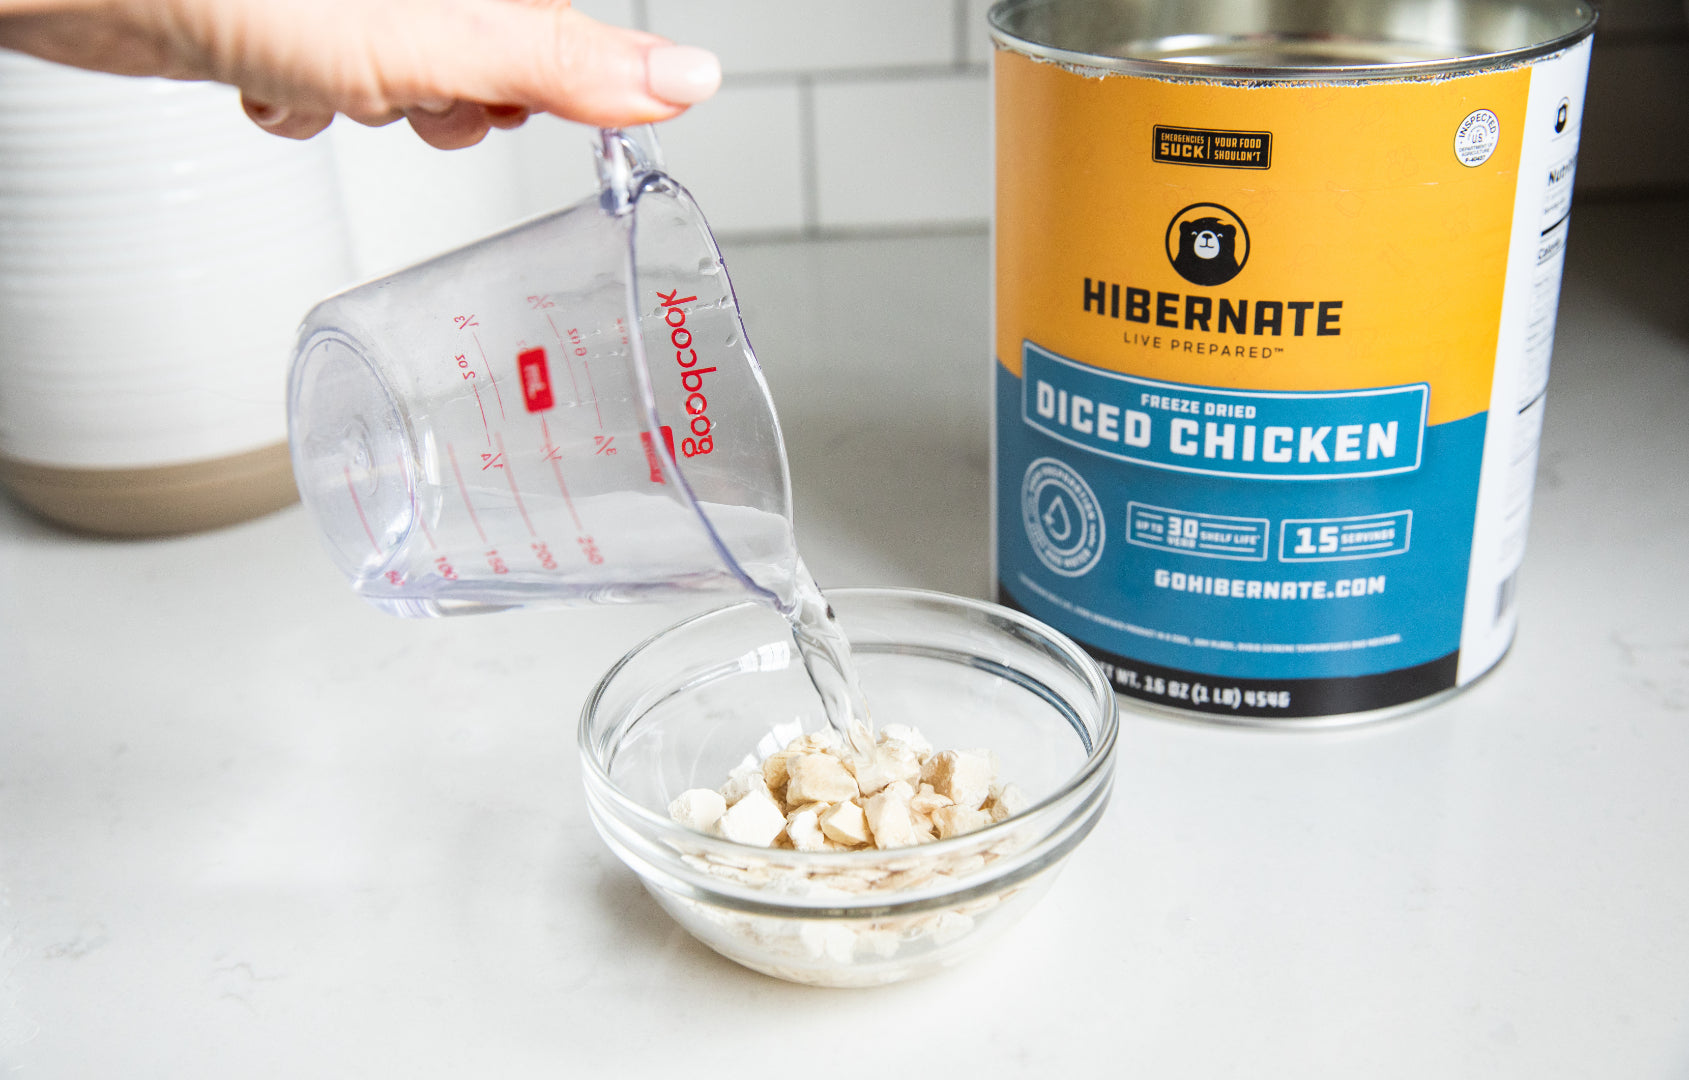 Emergencies suck, but emergency food shouldn’t, right? Get ready to have your mind blown about how good freeze-dried food can taste and why customers can’t get enough of the meals in Hibernate’s 2-week premium food supply bucket!